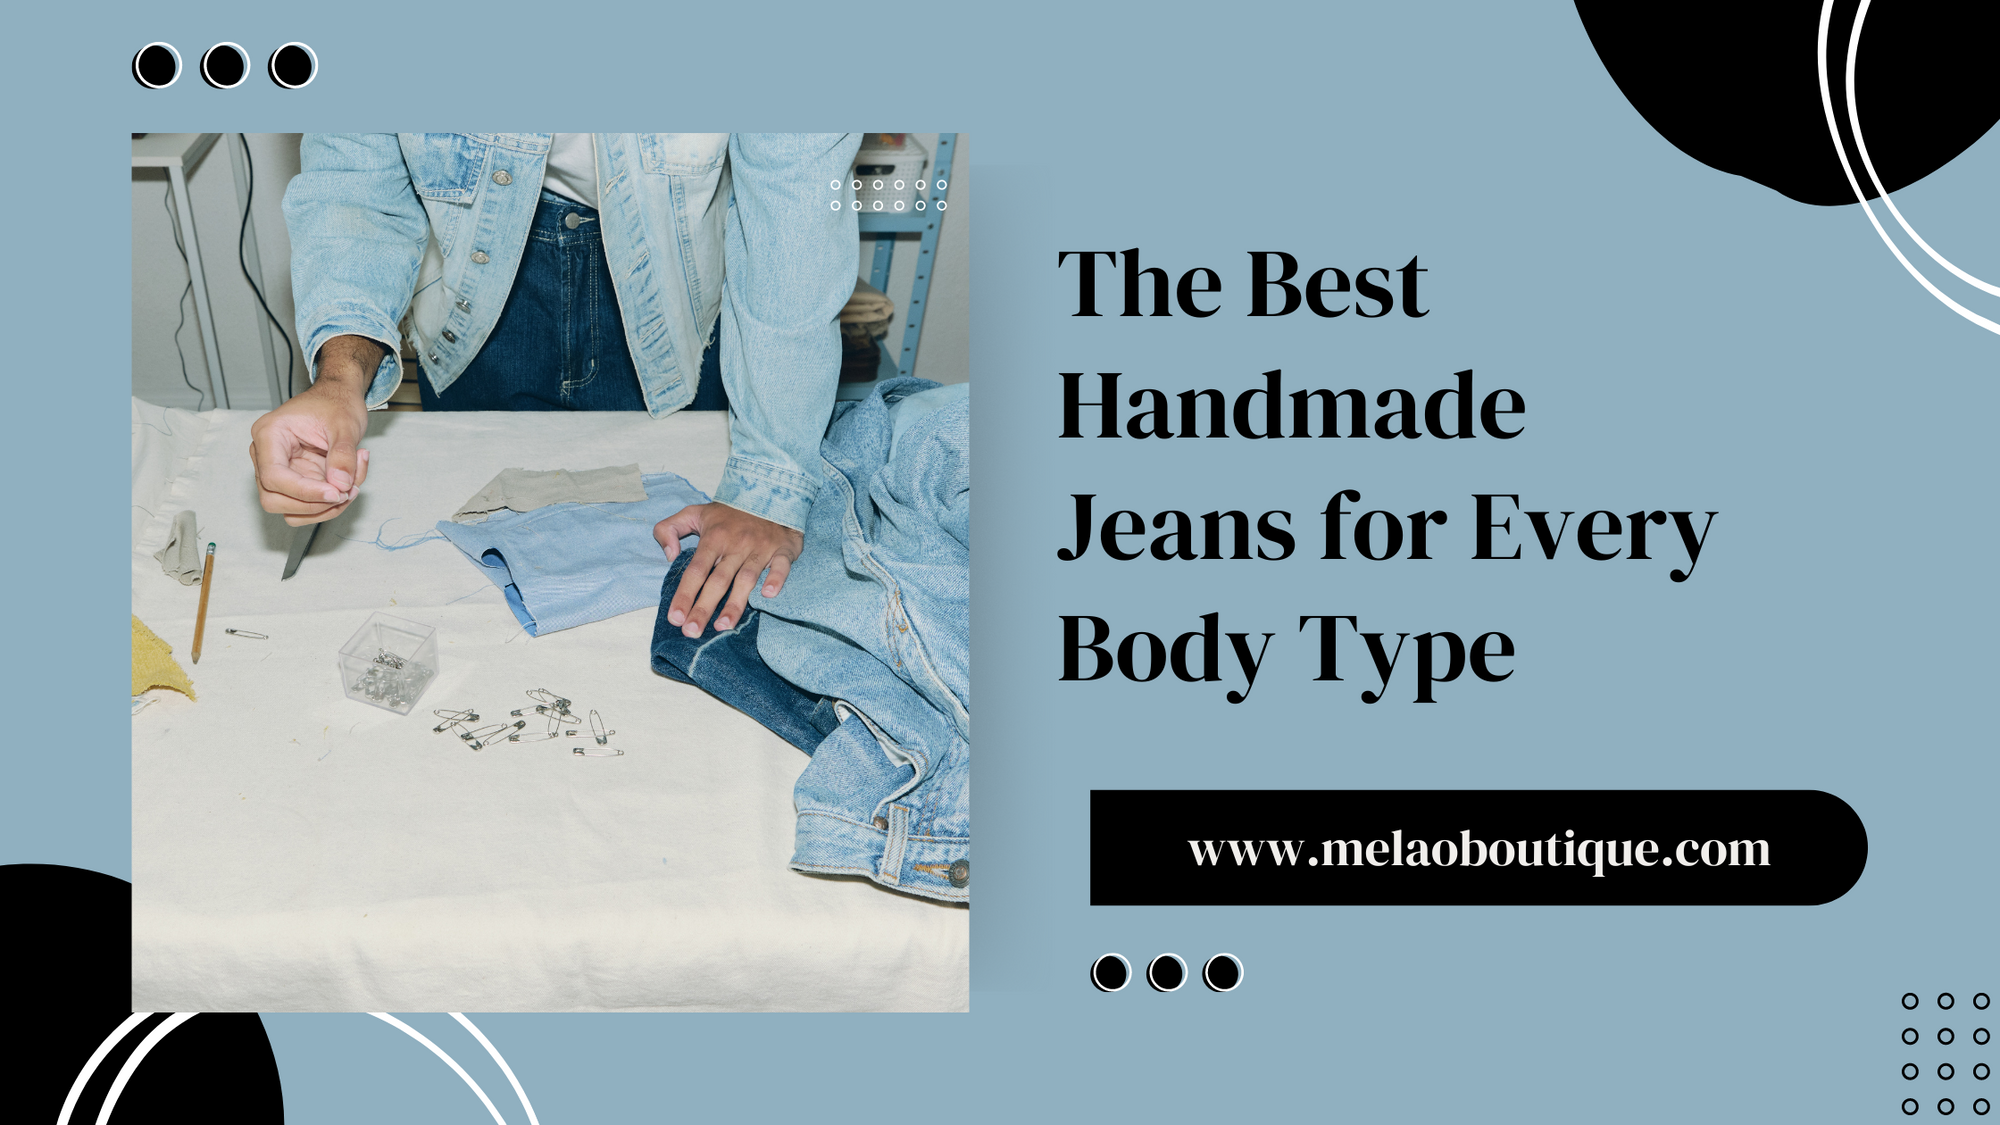 The Best Handmade Jeans for Every Body Type